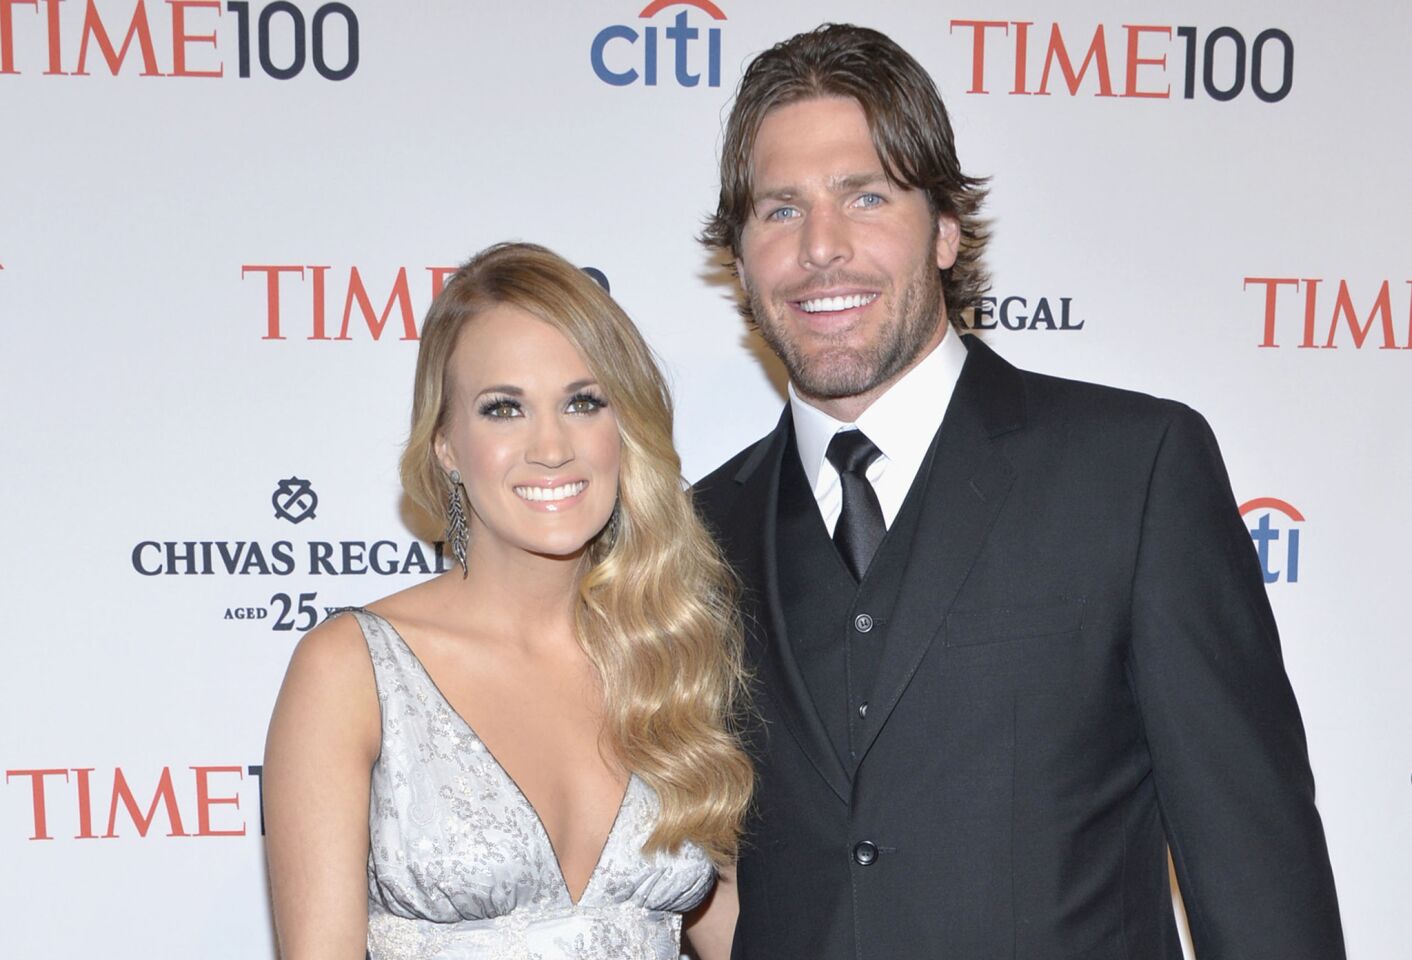 Singer Carrie Underwood and husband Mike Fisher are parents to their first child, Isaiah Michael Fisher. The couple, who tied the knot in a Southern-style wedding in Georgia in 2010, made the announcement (with help from her dogs) on Twitter.